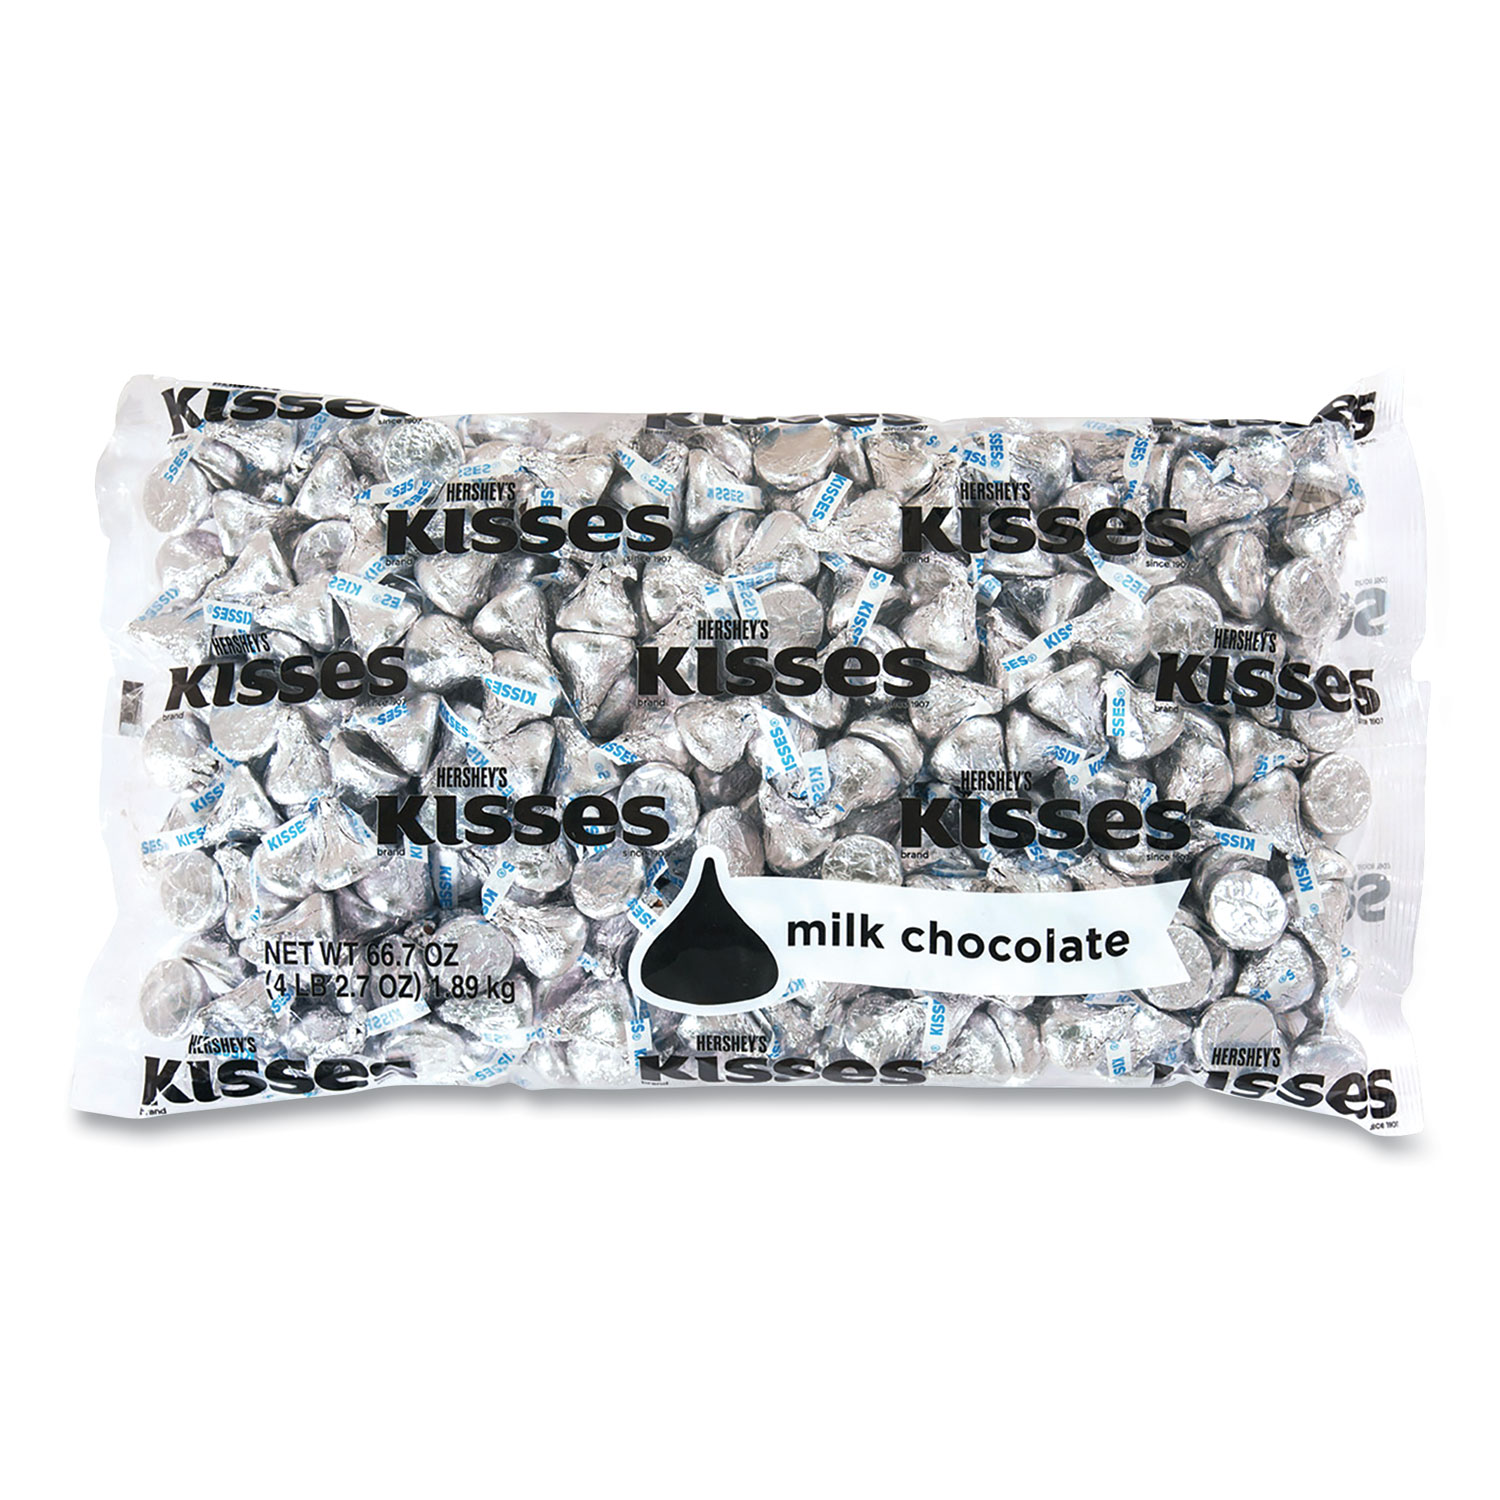 Hershey®s KISSES, Milk Chocolate, Silver Wrappers, 66.7 oz Bag, Free Delivery in 1-4 Business Days